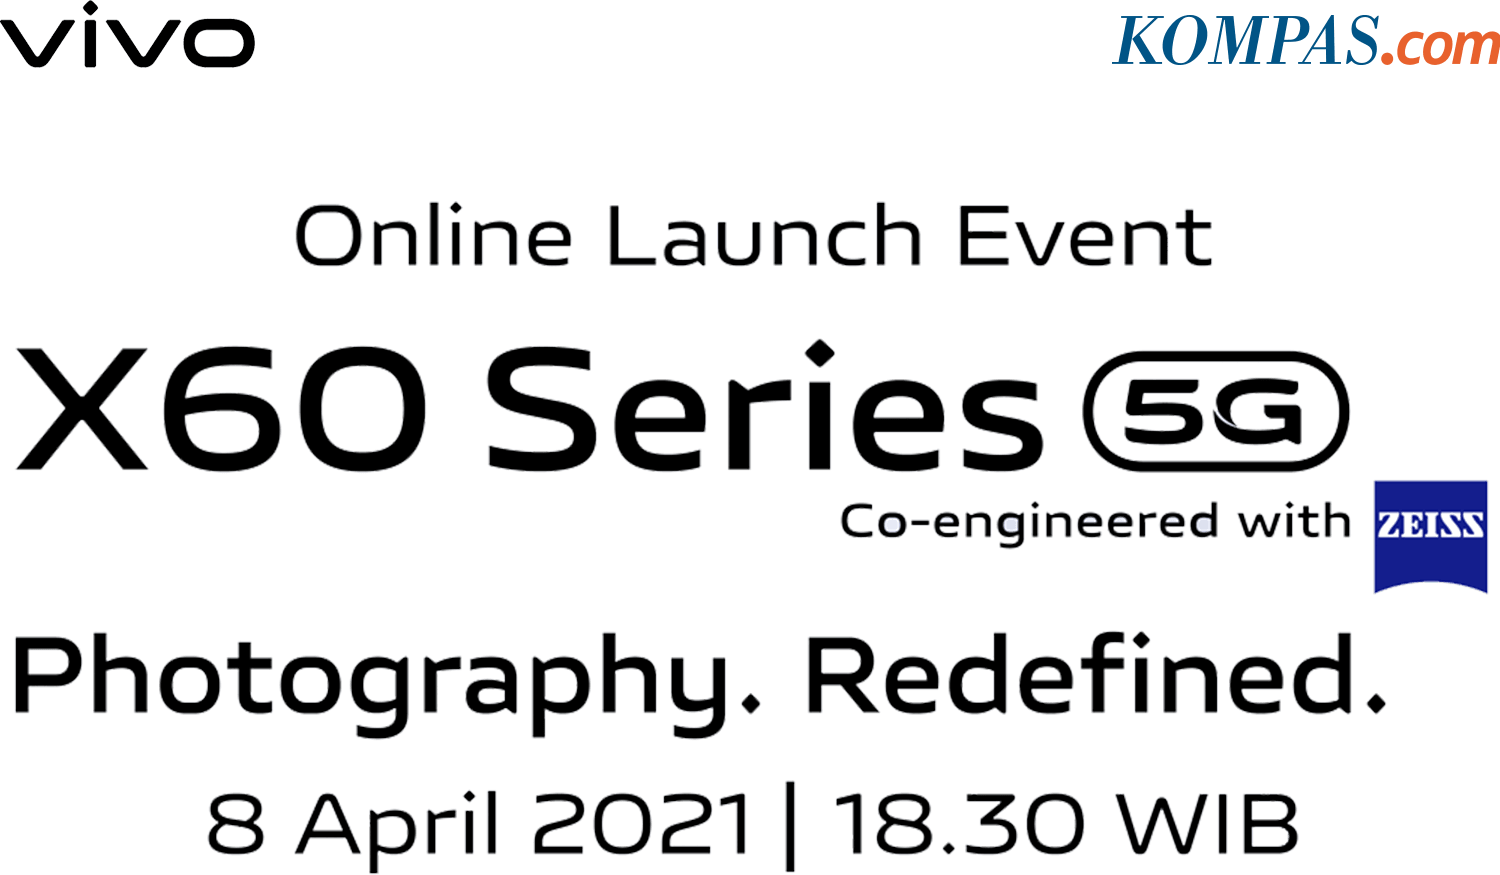 VIVO | Kompas.com | X60 Series 5G. Co Engineered with Zeiss - Photography. Redefined - Online Launch Event. 8 April 2021 | 18.30 WIB. Live on Facebook, YouTube, Twitter, Instagram VIVO Indonesia